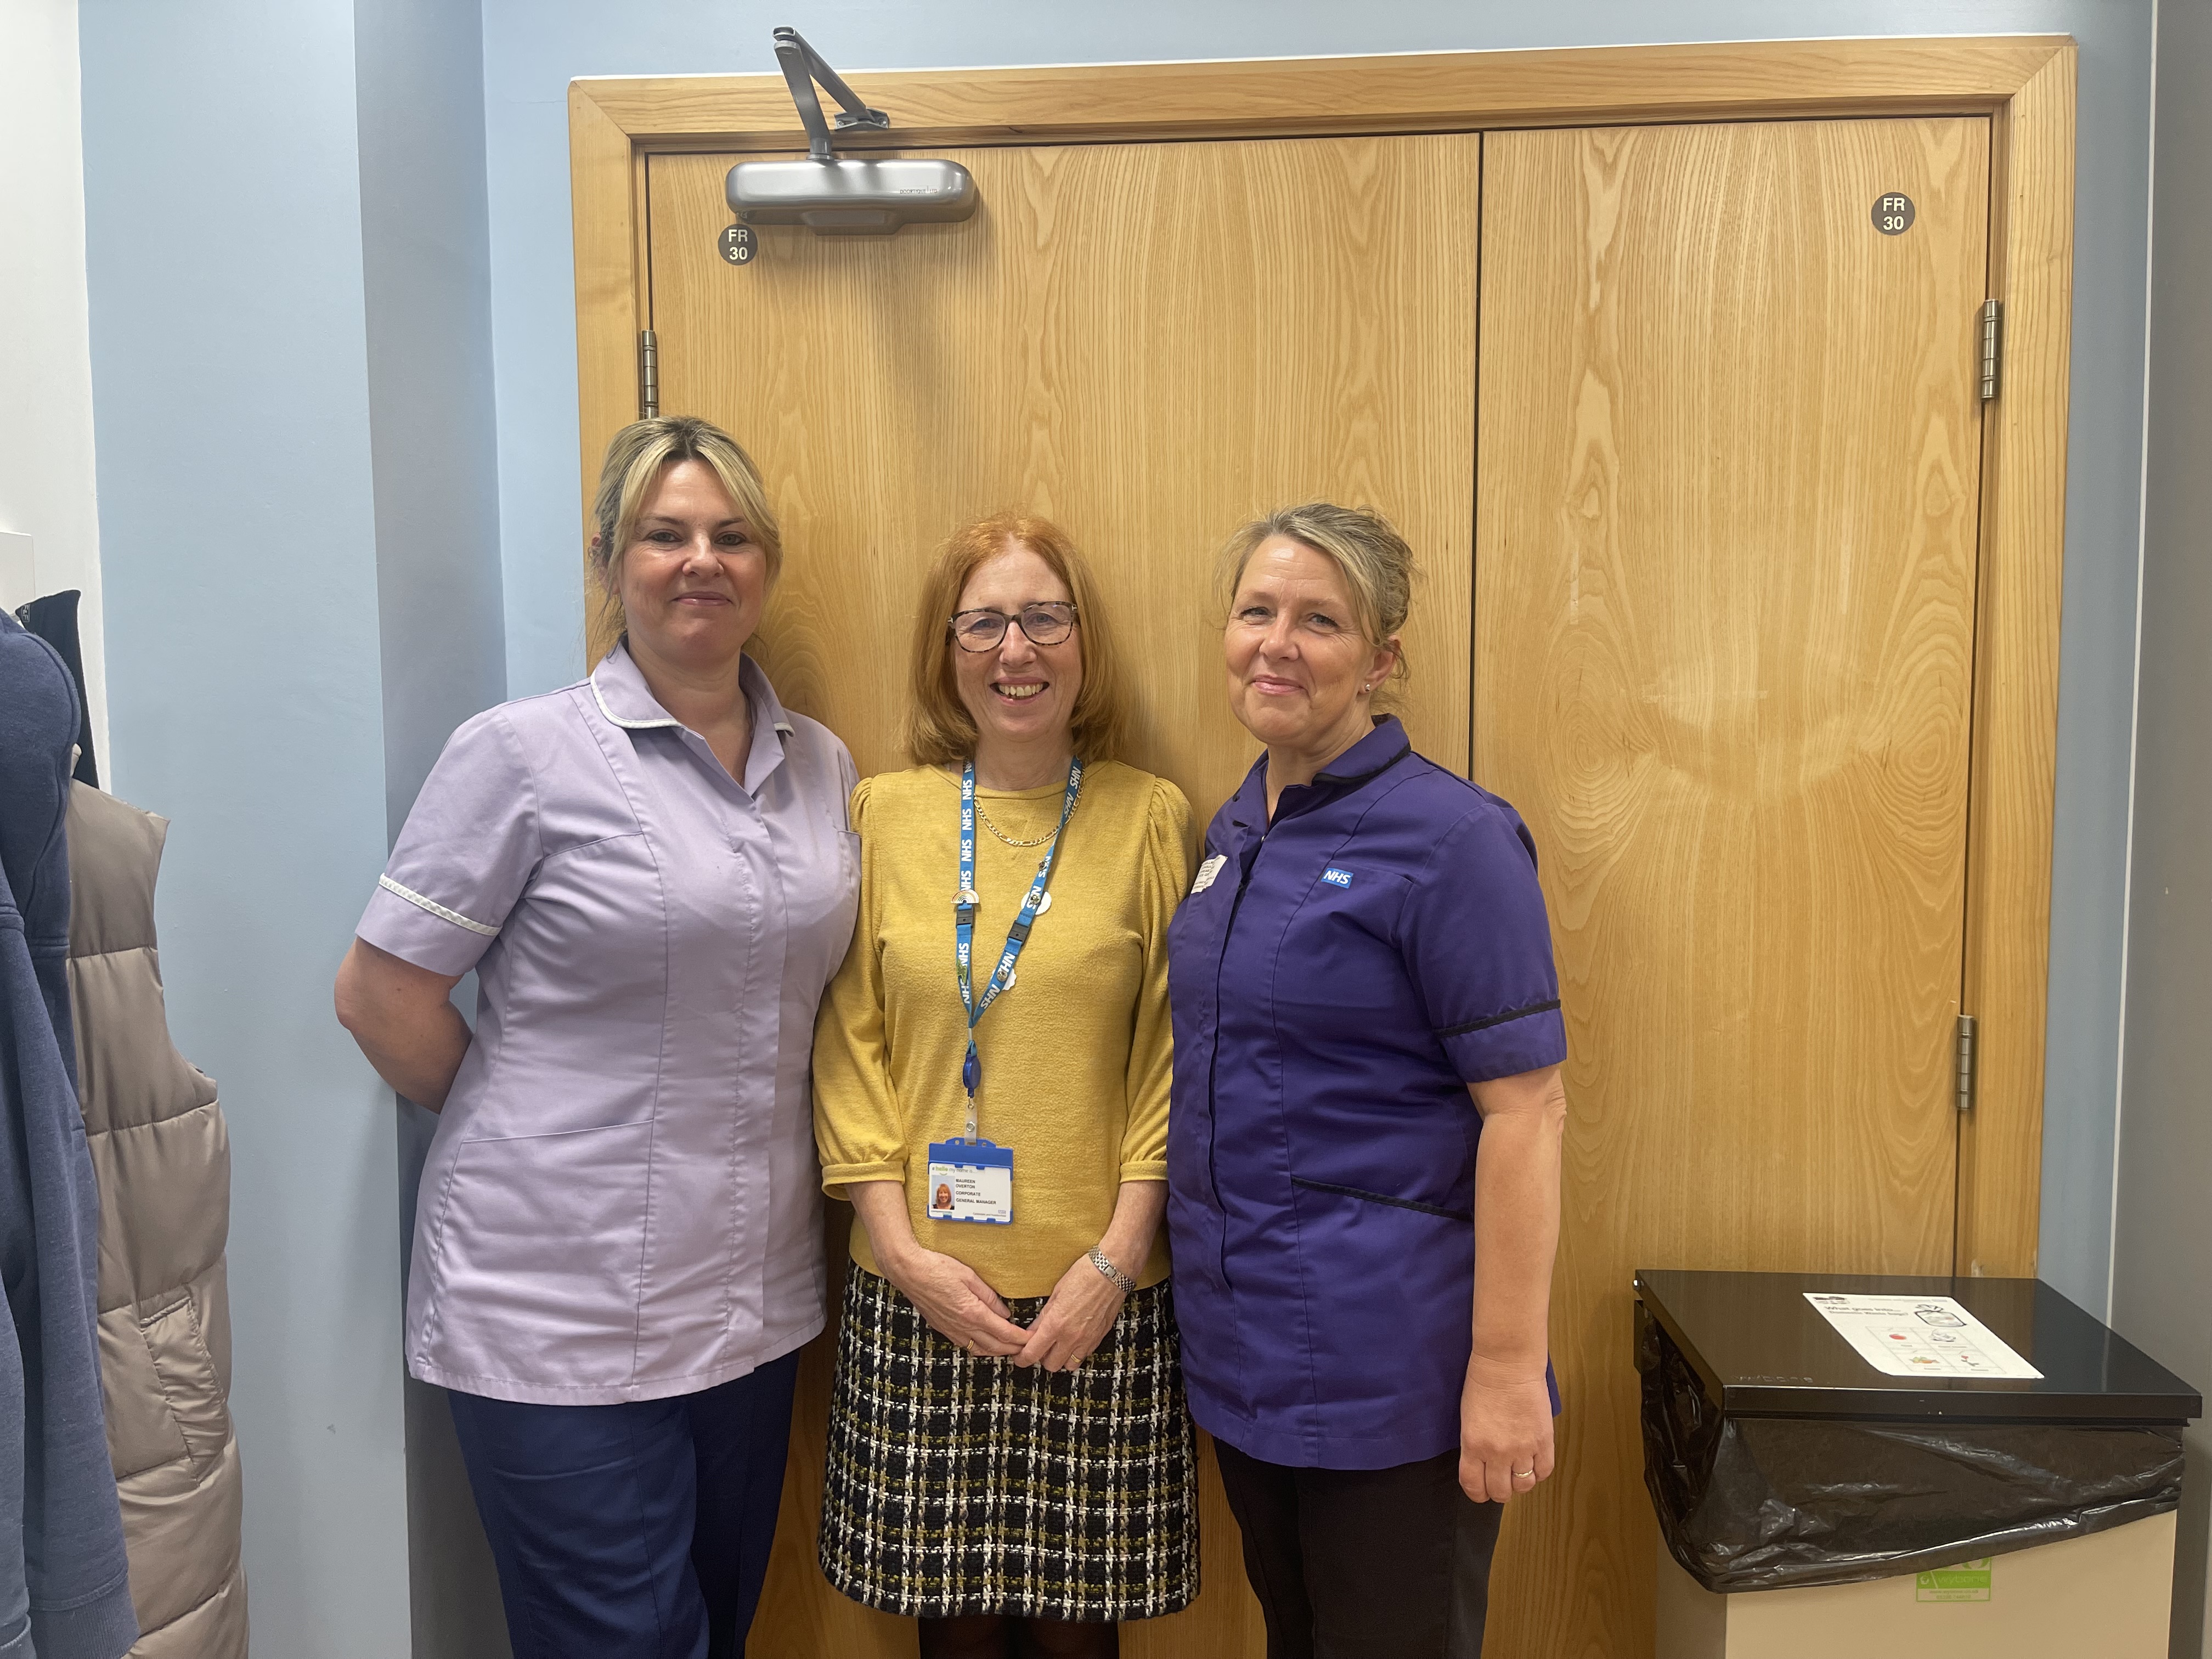 Our Breast Care Team